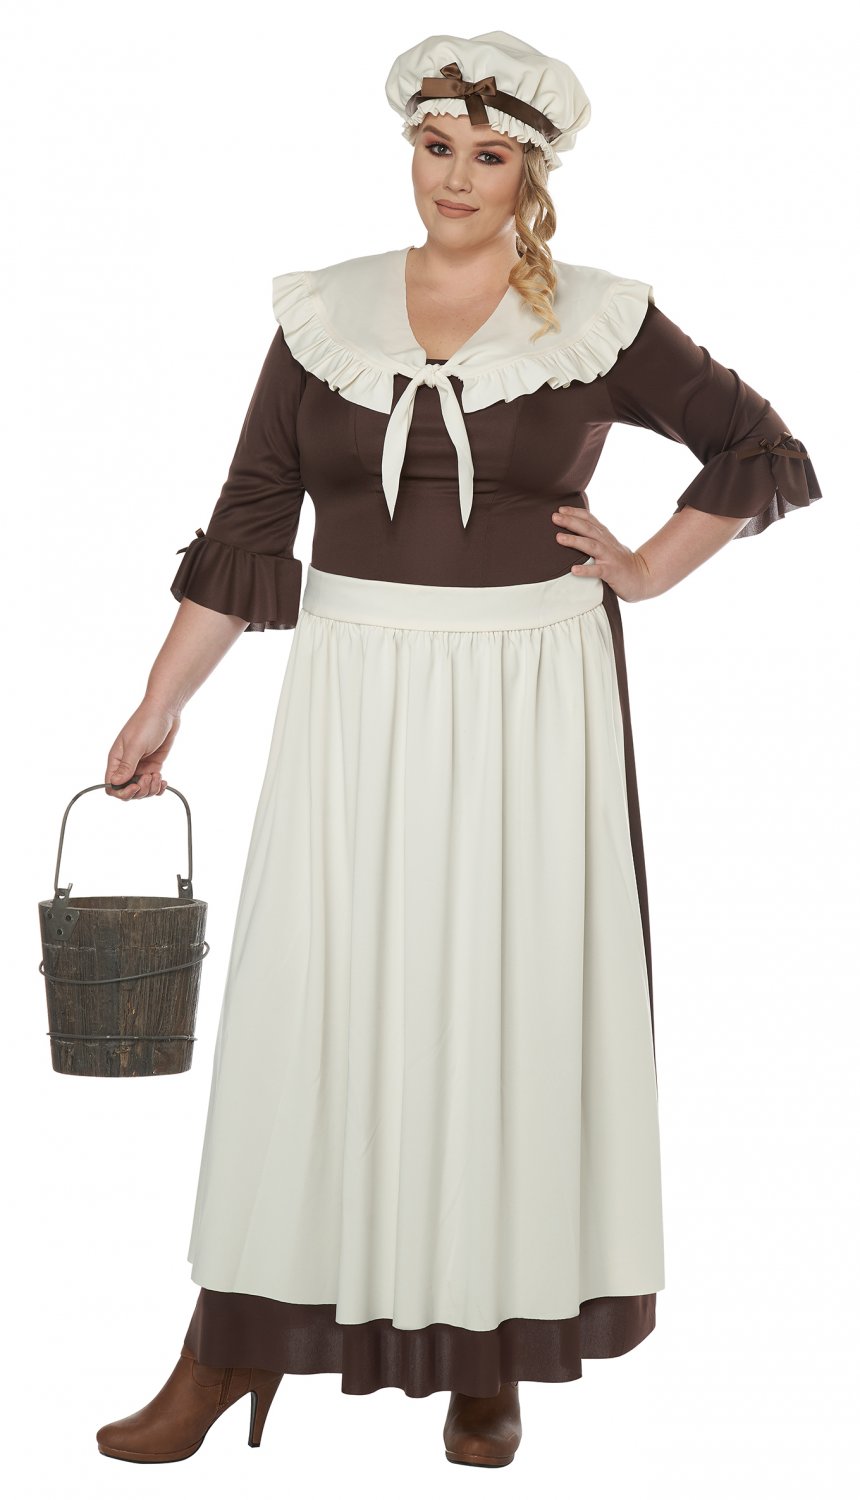 Plus Size 1xl 01752 Colonial Village Pioneer Woman Adult Costume 4699